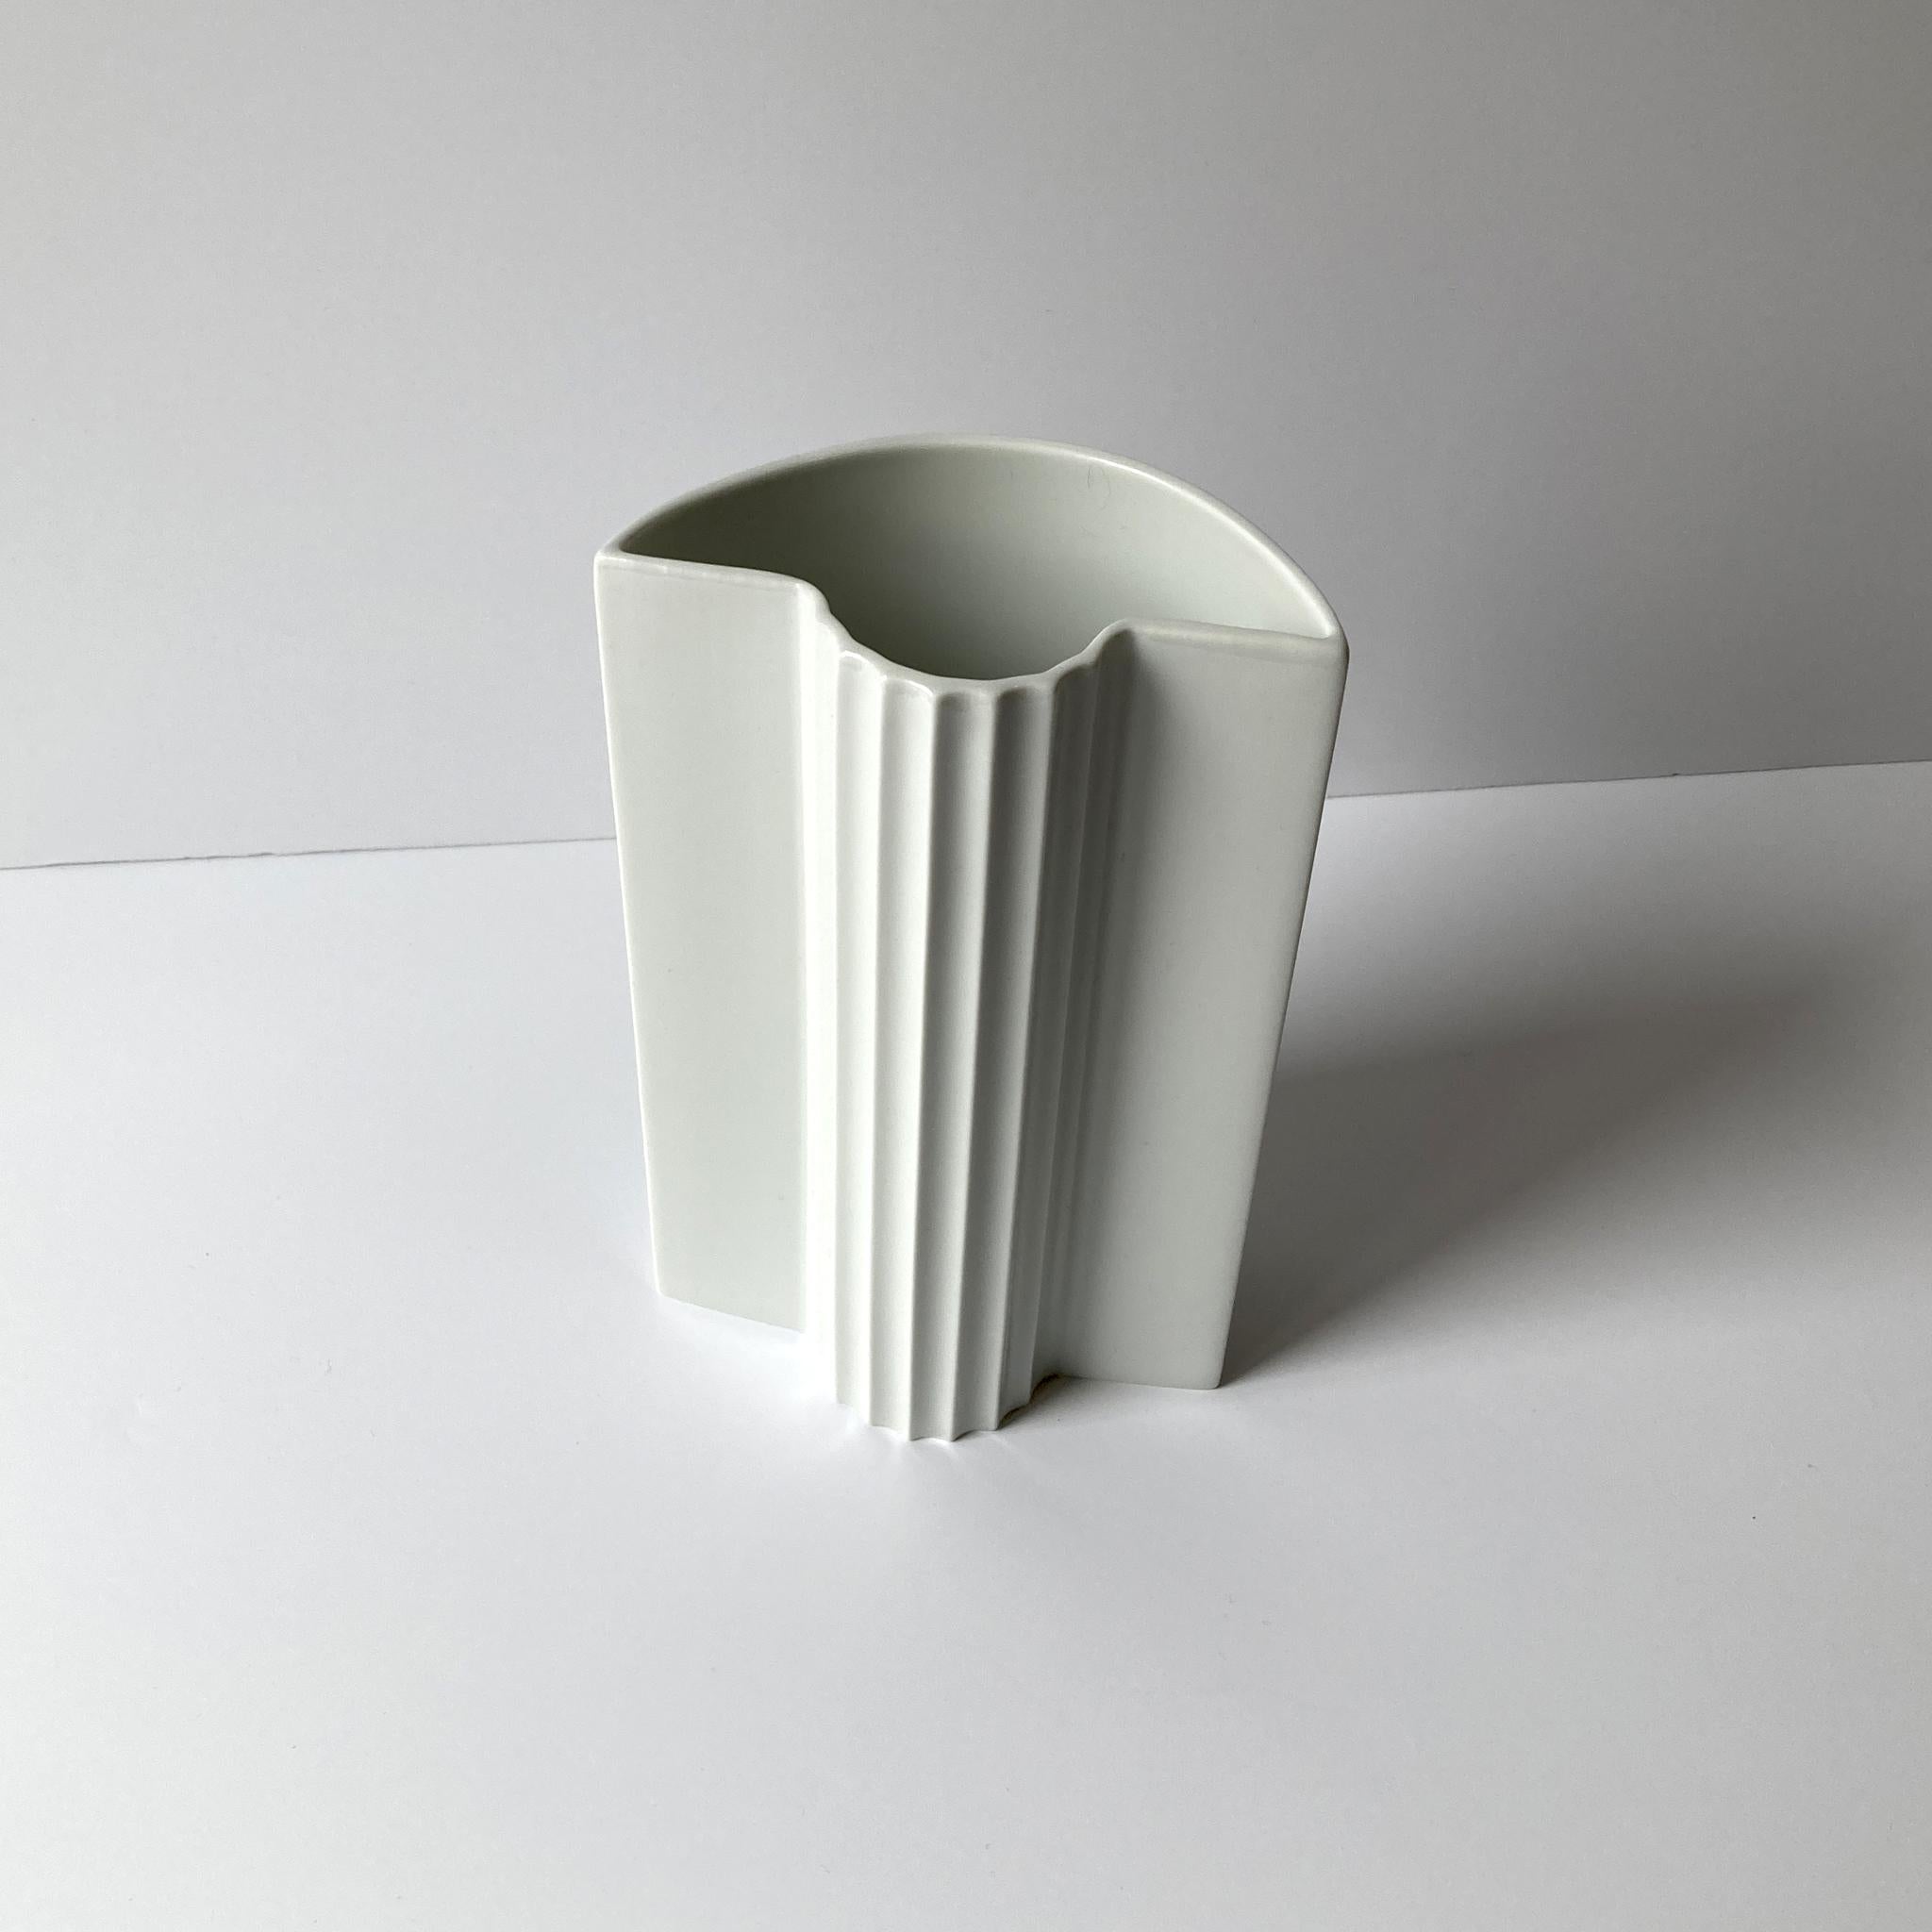 Rosenthal and Thomas Keramik White Porcelain Vases, Pair of Two For Sale 6